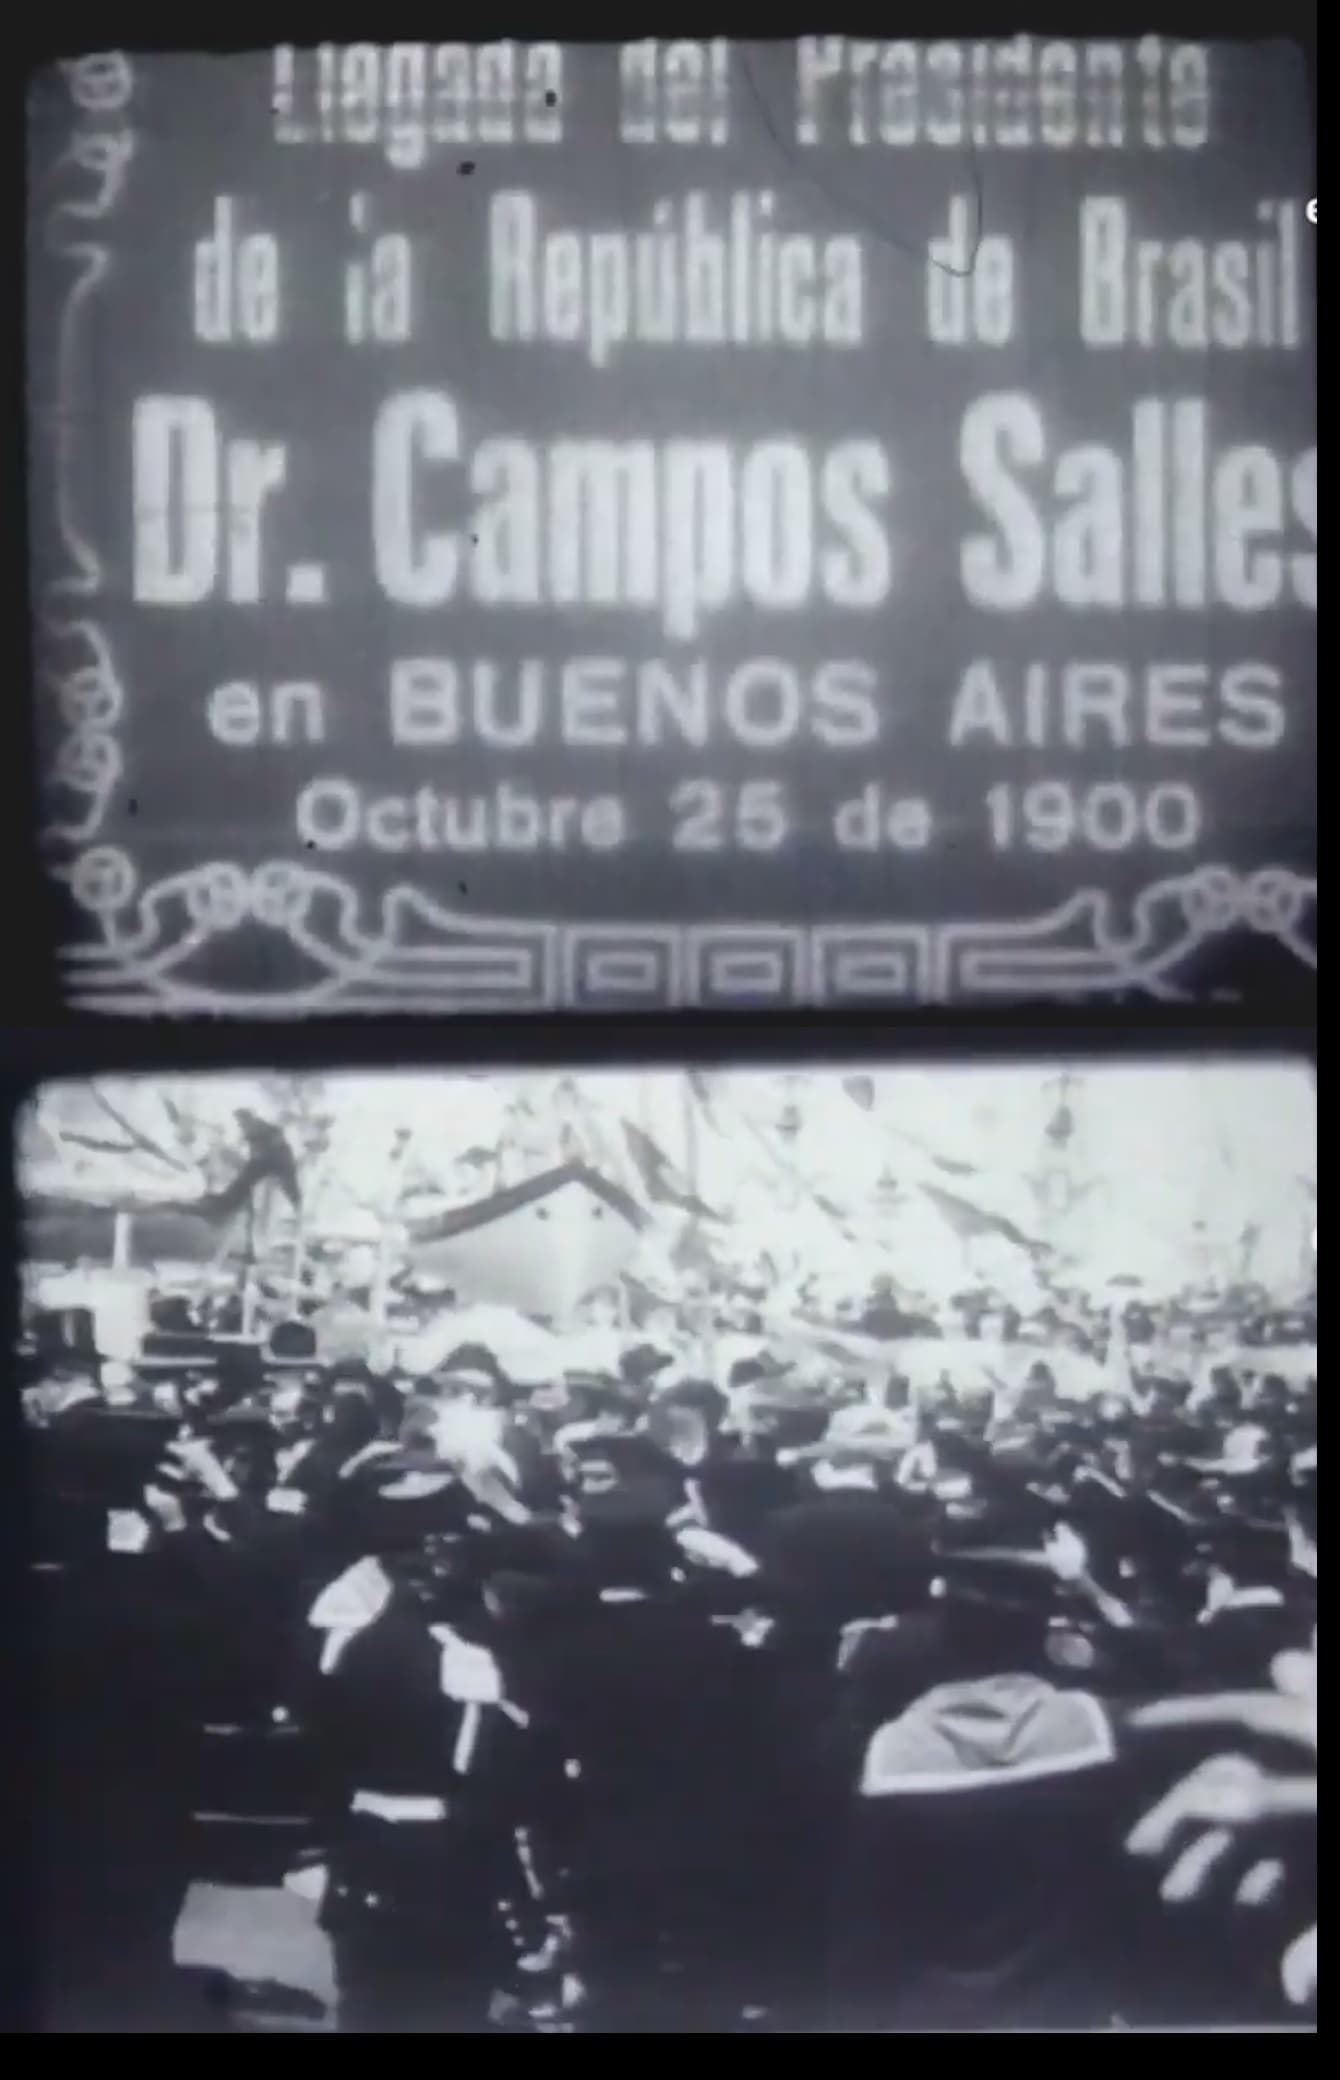 Trip of Dr. Campos Salles to Buenos Aires